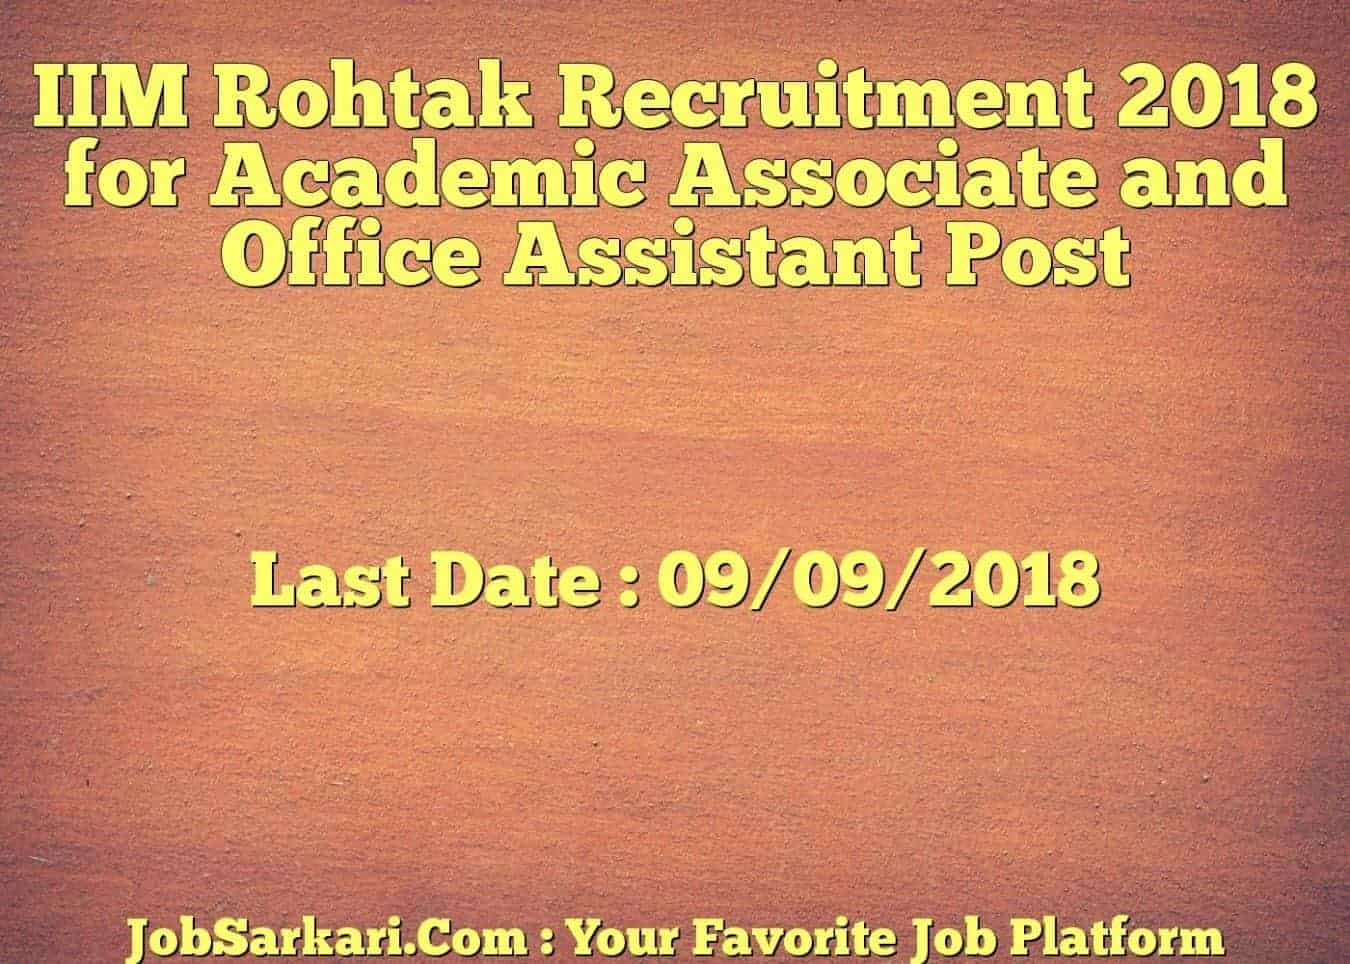 IIM Rohtak Recruitment 2018 for Academic Associate and Office Assistant Post